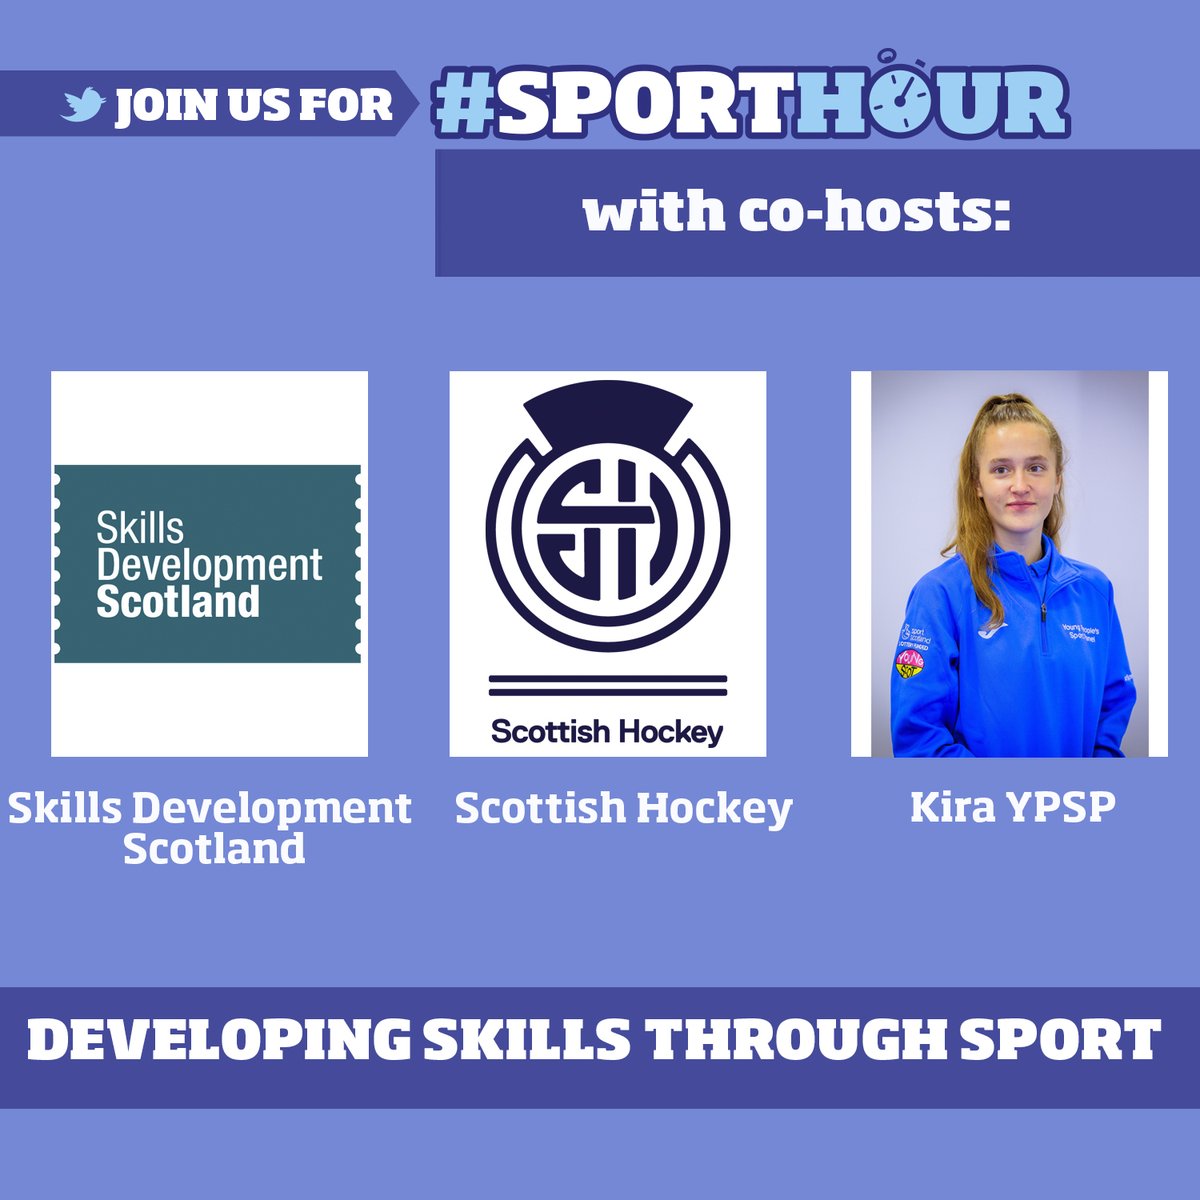 #SPORTHOUR | Meet your co-hosts for Monday's #Sporthour 🙌 Absolutely delighted to have @skillsdevscot, @ScottishHockey and @K_Henry02 with us to discuss developing skills through sport. Join the conversation ⬇️ 📆Monday 7 November ⏰9-10pm